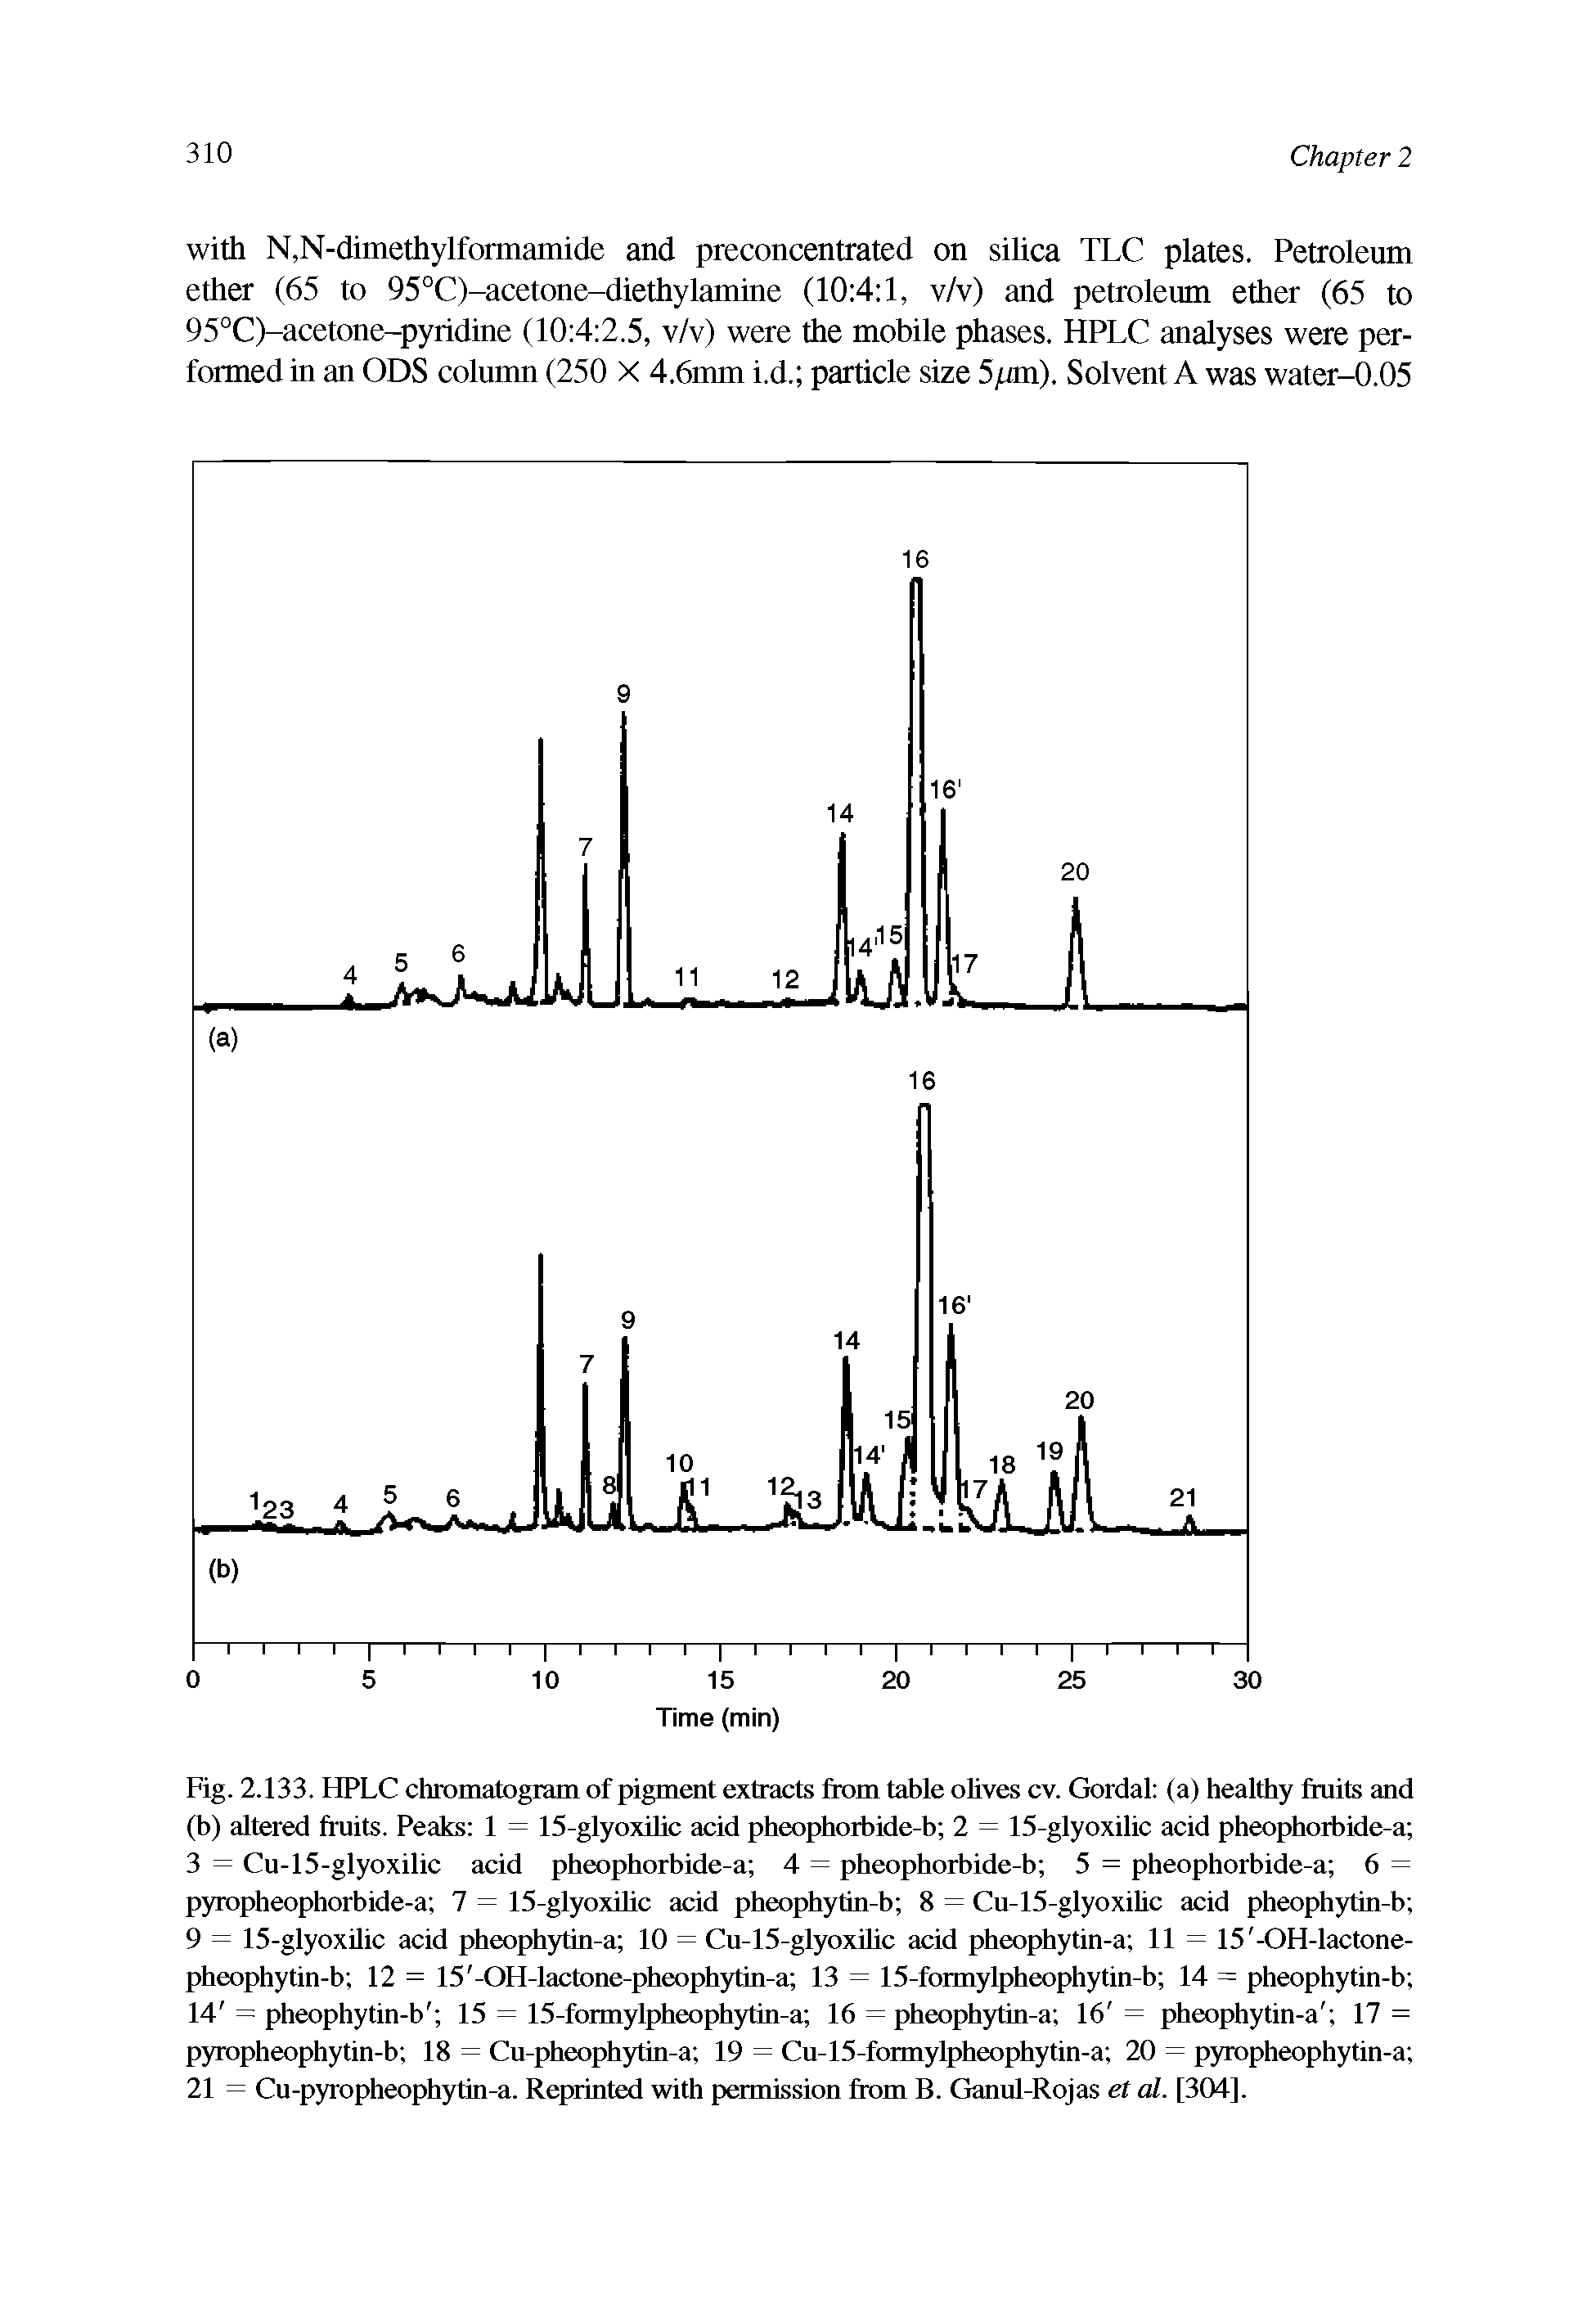 Fig. 2.133. HPLC chromatogram of pigment extracts from table olives cv. Gordal (a) healthy fruits and (b) altered fruits. Peaks 1 = 15-glyoxilic acid pheophorbide-b 2 = 15-glyoxilic acid pheophorbide-a 3 = Cu-15-glyoxilic acid pheophorbide-a 4 = pheophorbide-b 5 = pheophorbide-a 6 = pyropheophorbide-a 7 = 15-glyoxilic acid pheophytin-b 8 = Cu-15-glyoxilic acid pheophytin-b 9 = 15-glyoxilic acid pheophytin-a 10 = Cu-15-glyoxilic acid pheophytin-a 11 = 15 -OH-lactone-pheophytin-b 12 = 15 -OH-lactone-pheophytin-a 13 = 15-formylpheophytin-b 14 = pheophytin-b 14 = pheophytin-b 15 = 15-formylpheophytin-a 16 = pheophytin-a 16 = pheophytin-a 17 = pyropheophytin-b 18 = Cu-pheophytin-a 19 = Cu-15-formylpheophytin-a 20 = pyropheophytin-a 21 = Cu-pyropheophytin-a. Reprinted with permission from B. Ganul-Rojas el al. [304].